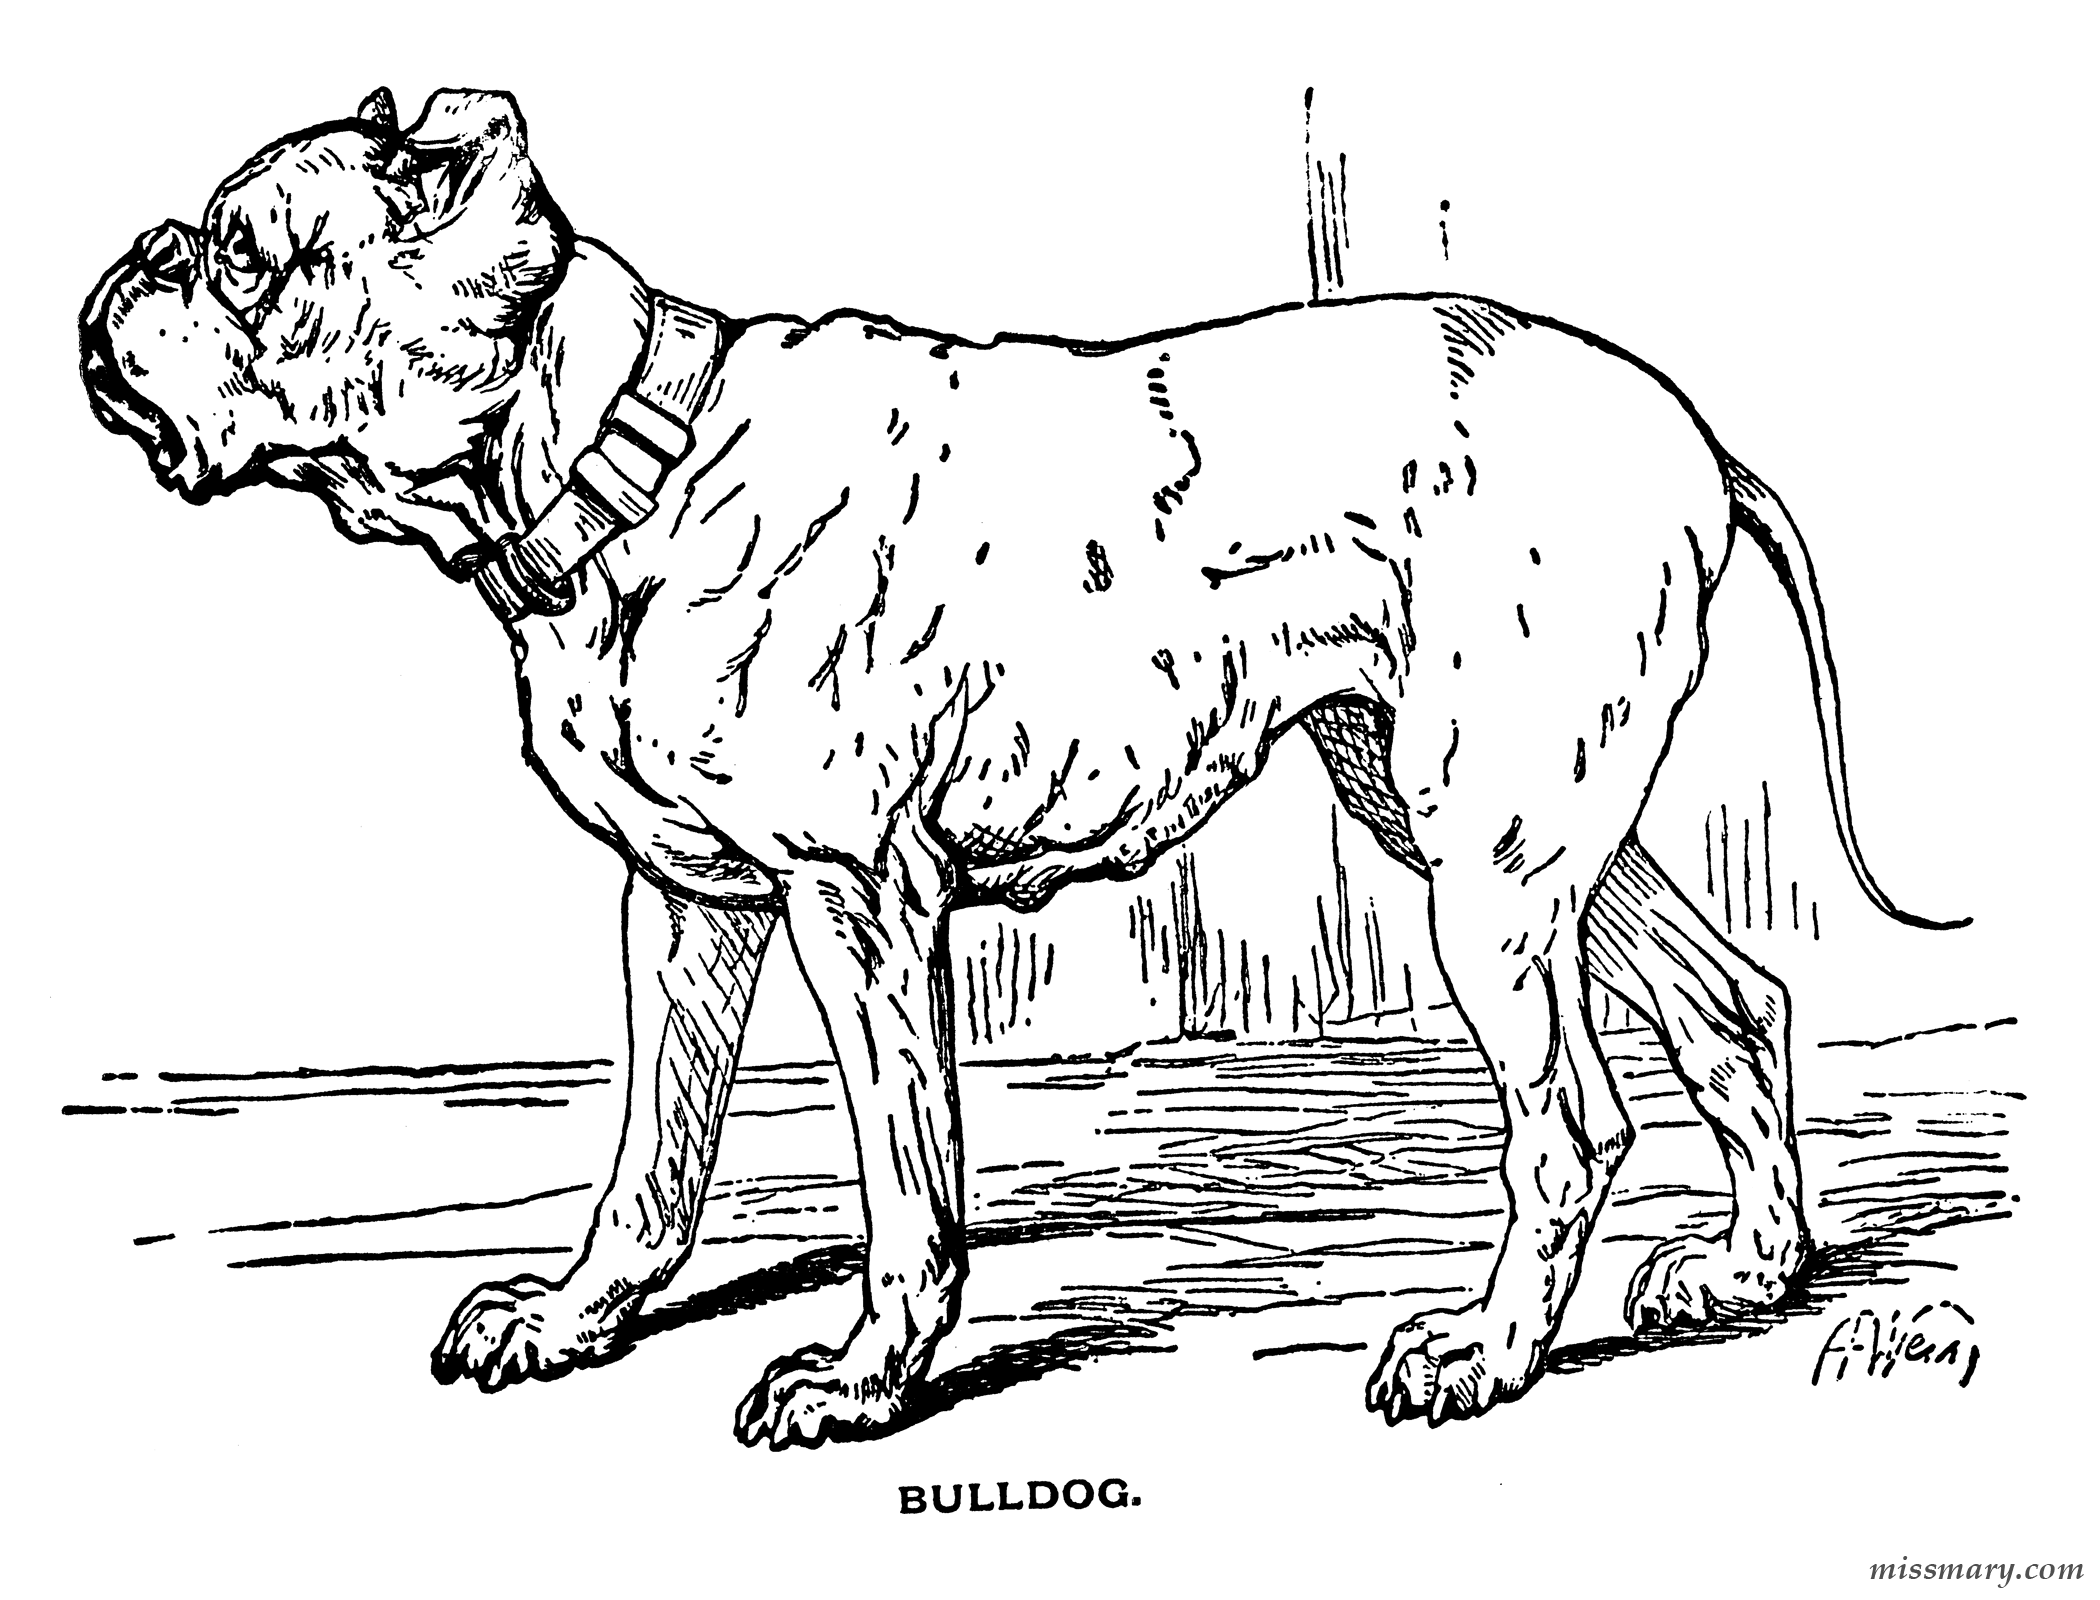 Bulldog - Coloring Pages for Kids and for Adults